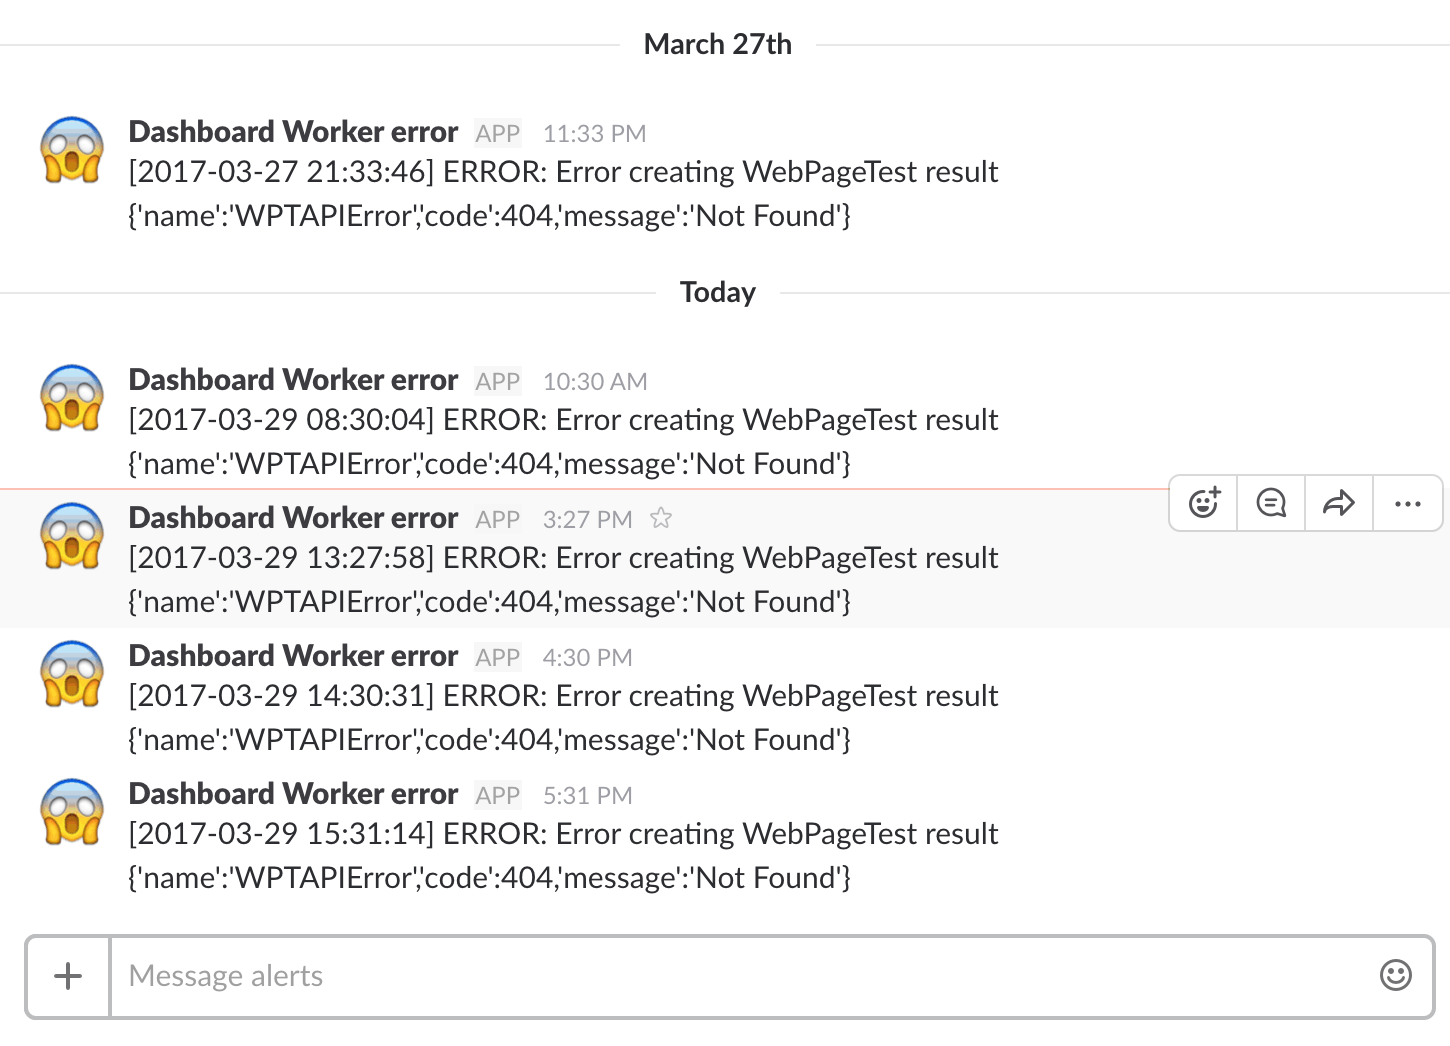 Getting alerts from Slack when we get an error in the logs